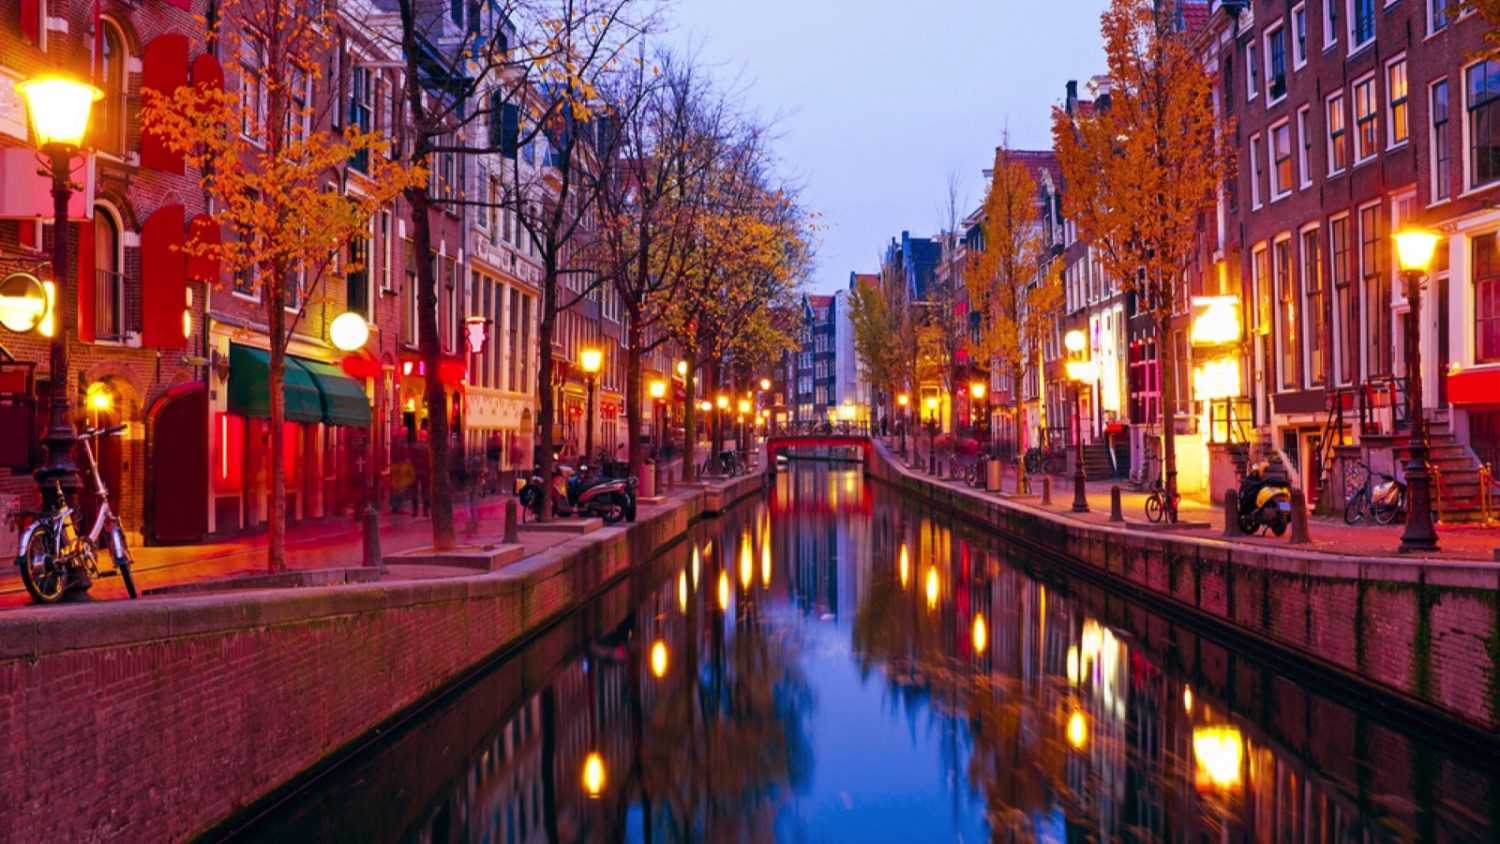 Red light district, Amsterdam the Netherlands at night